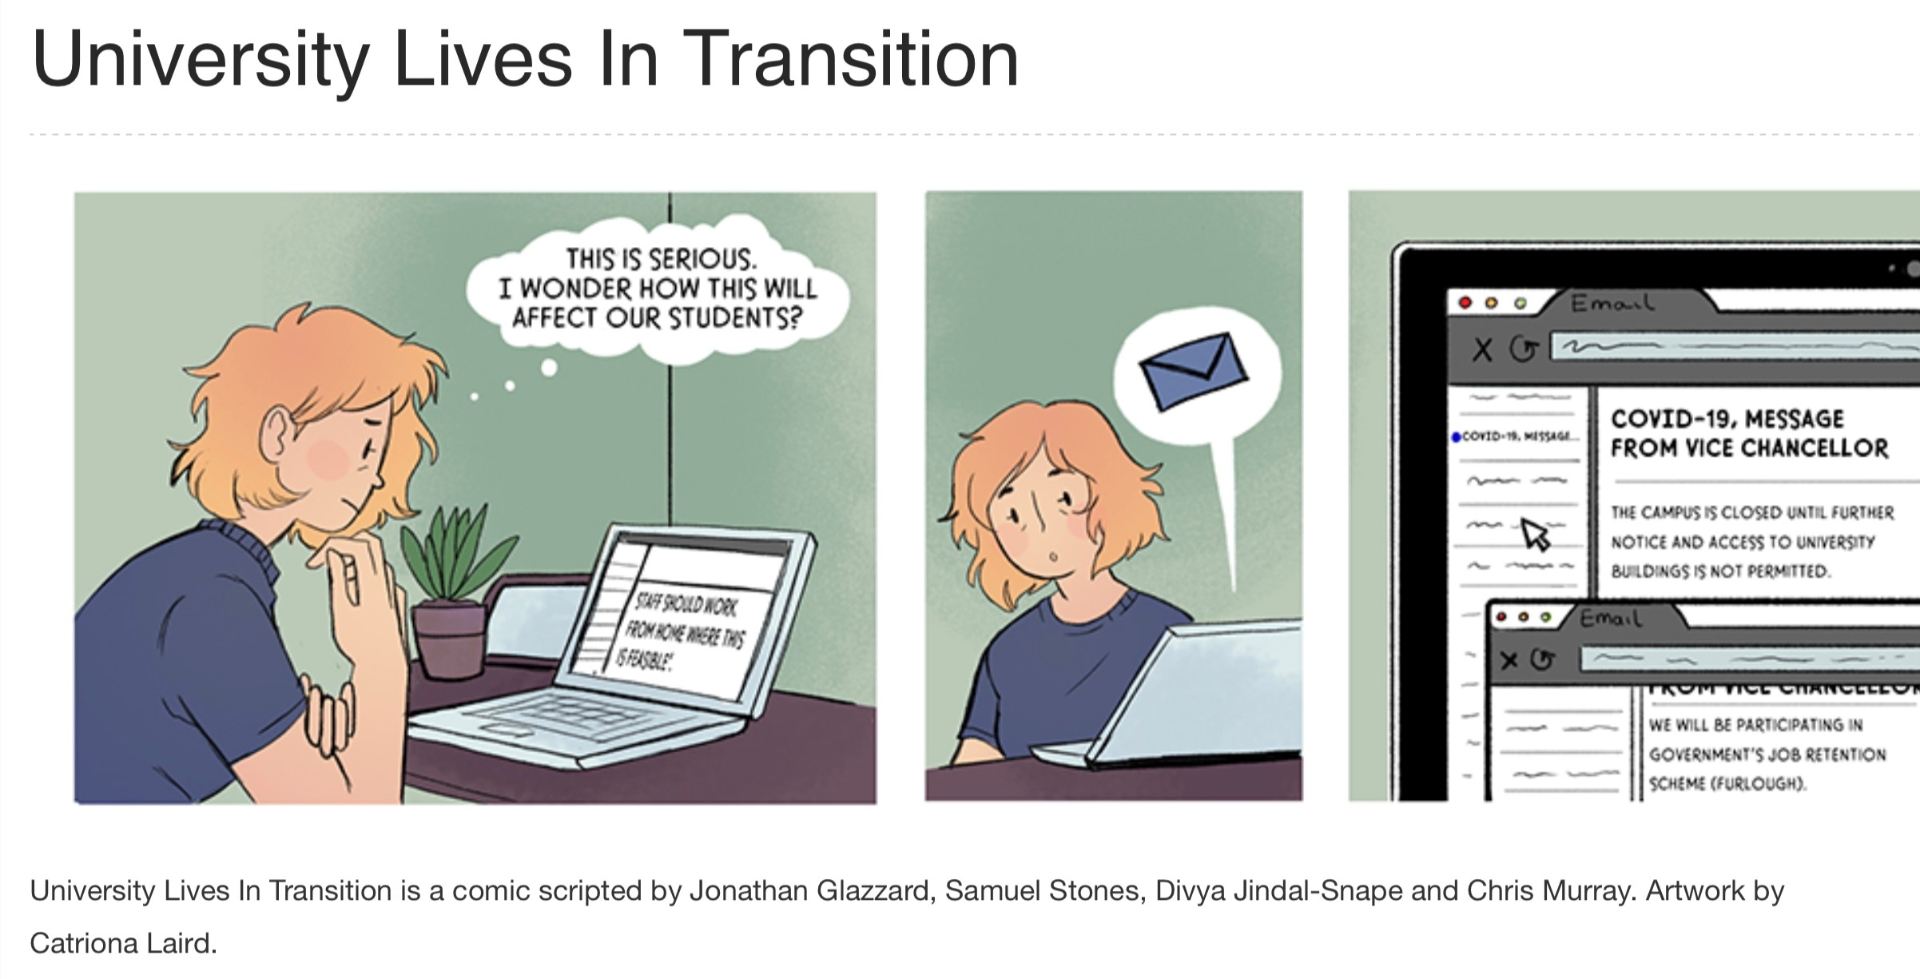 Graphic image from the University Lives in Transition, a comic scripted by Jonathan Glazzard, Samuel Stones, Divya Jindal-Snape and Chris Murray. Artwork by Catriona Laird.